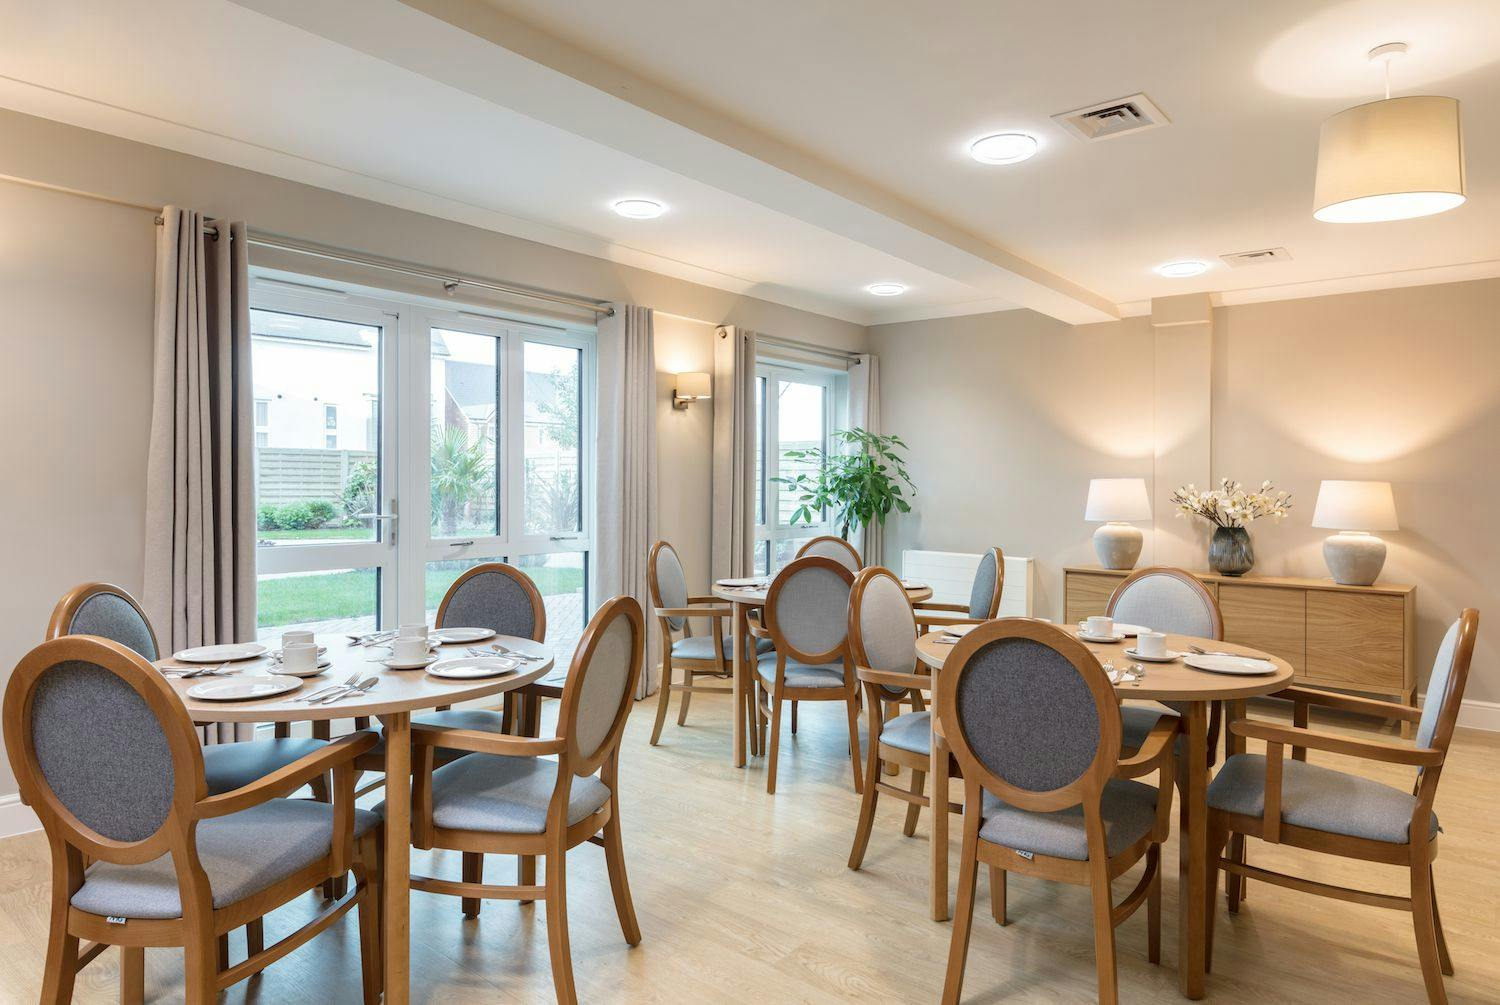 Dining area of Brabourne care home in Ashford, Kent